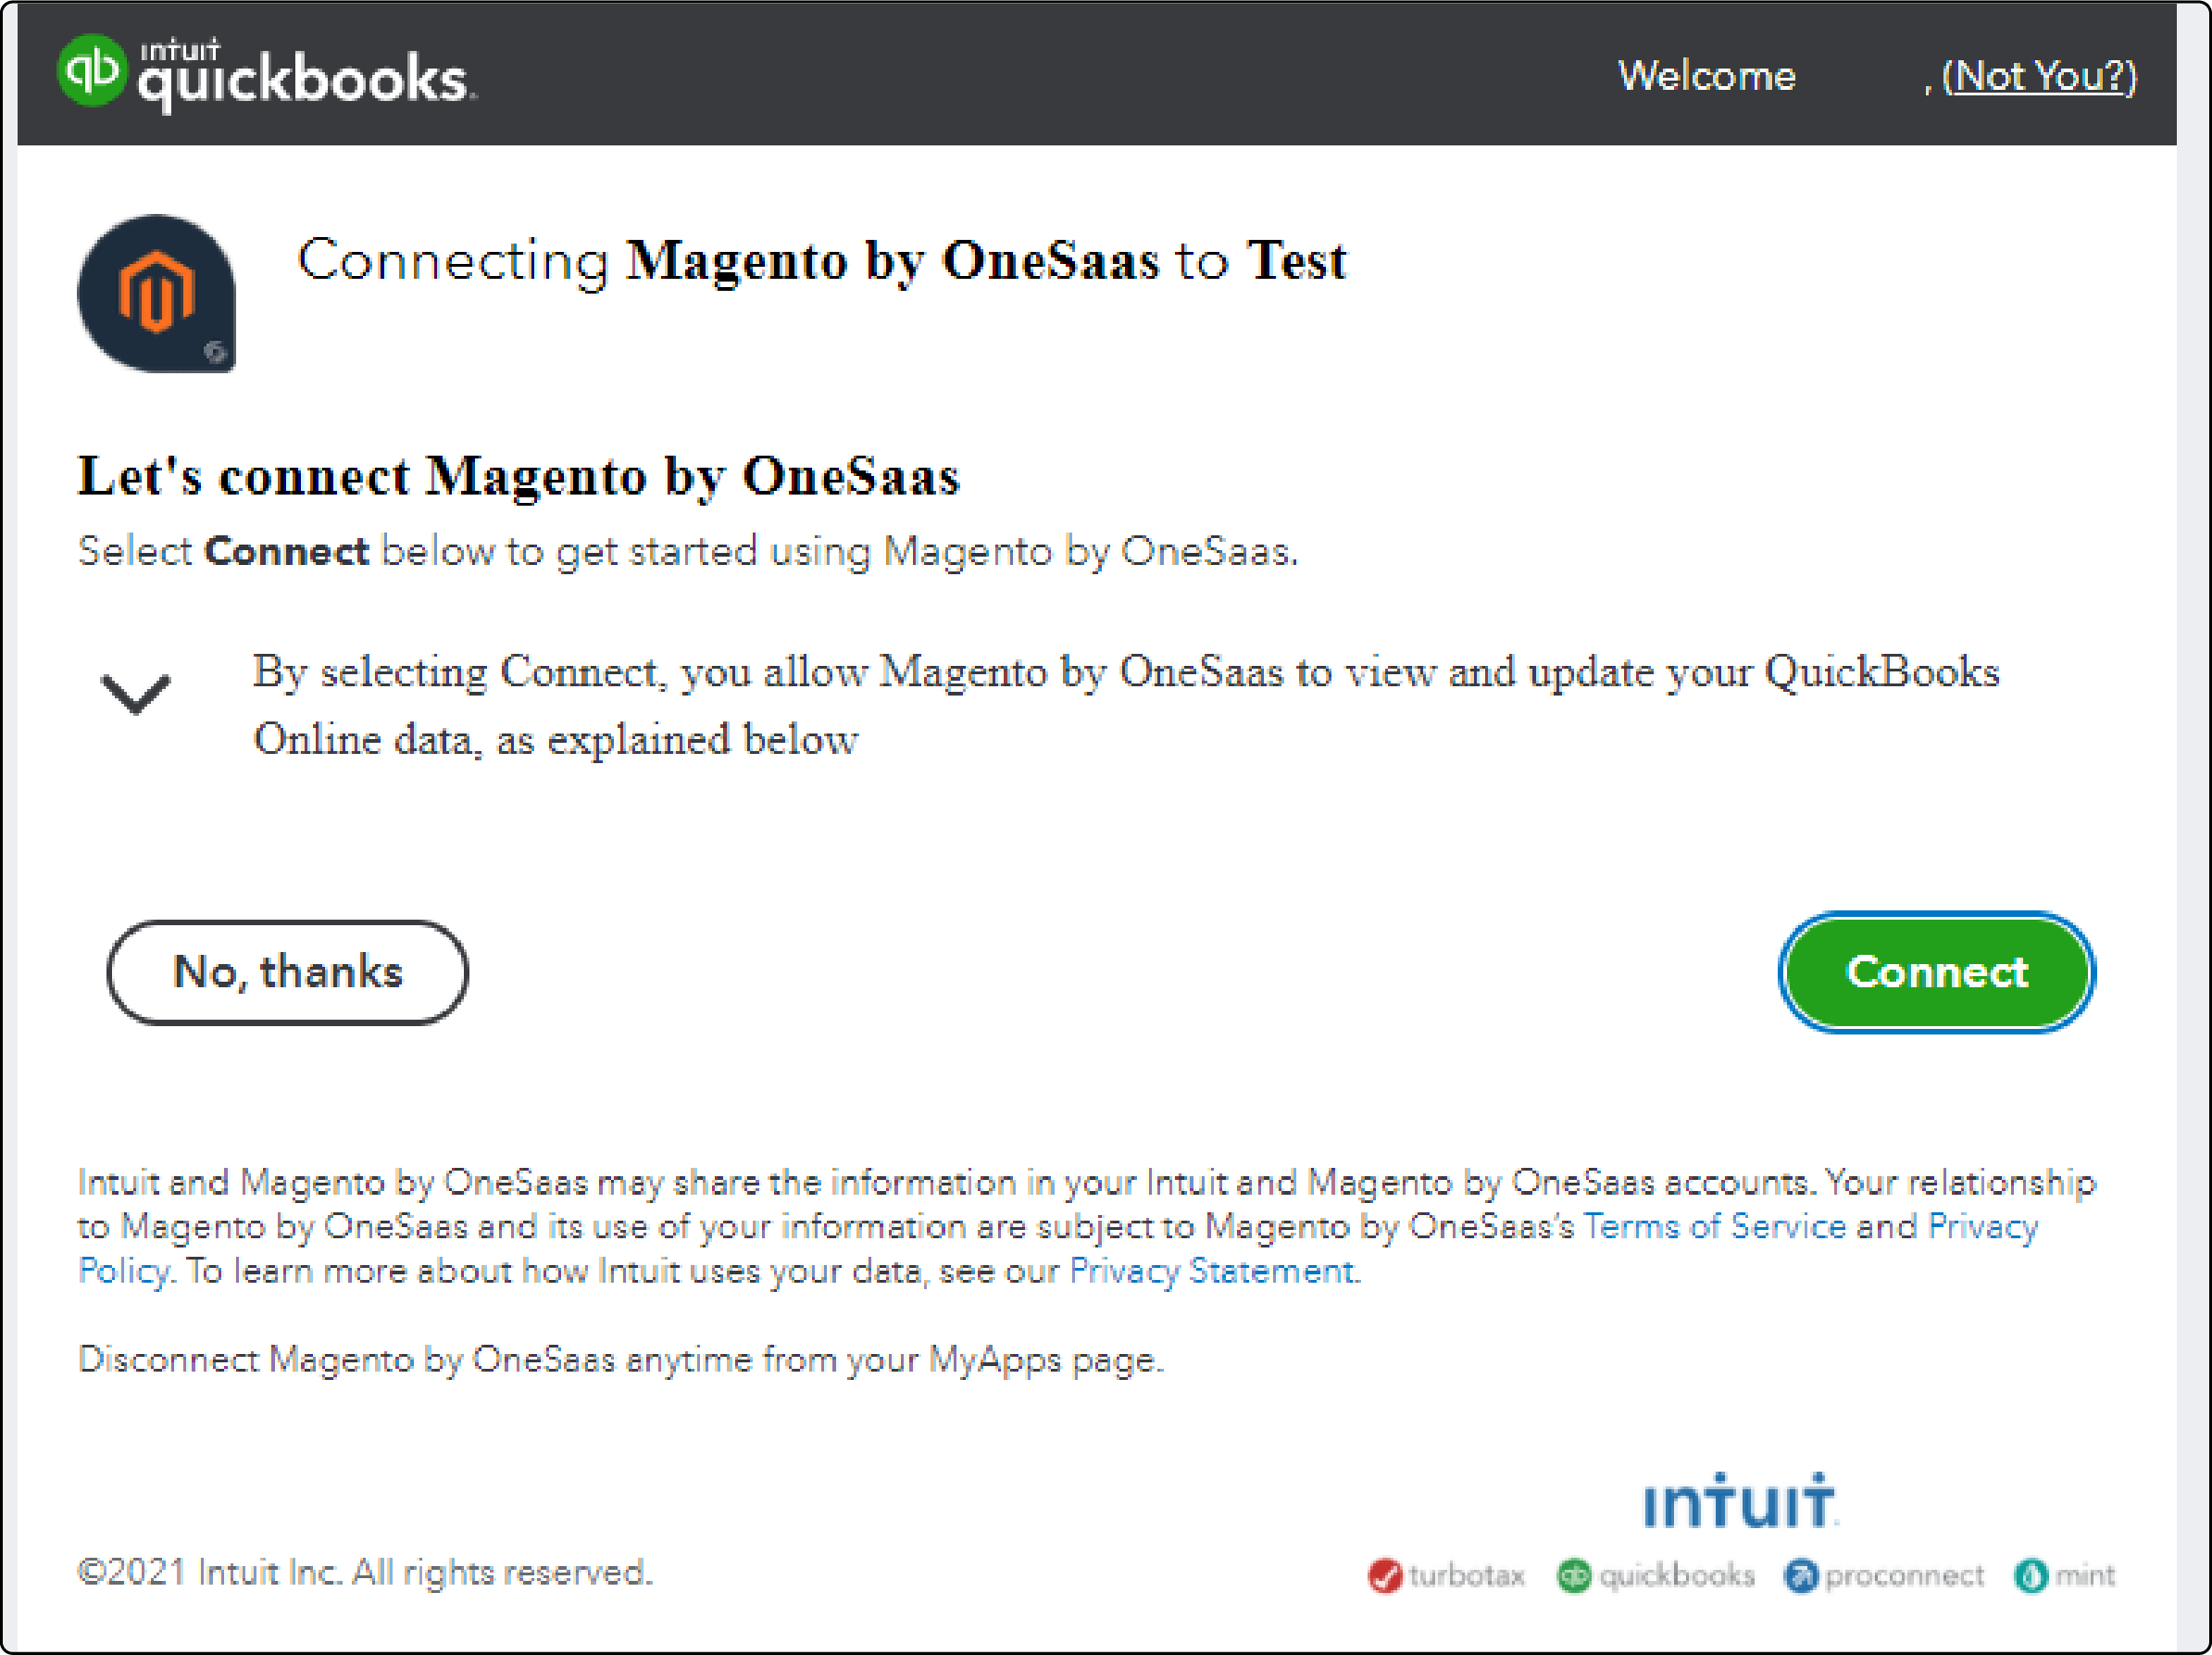 Interface of Magento QuickBooks Connector by OneSaas showcasing synchronization features